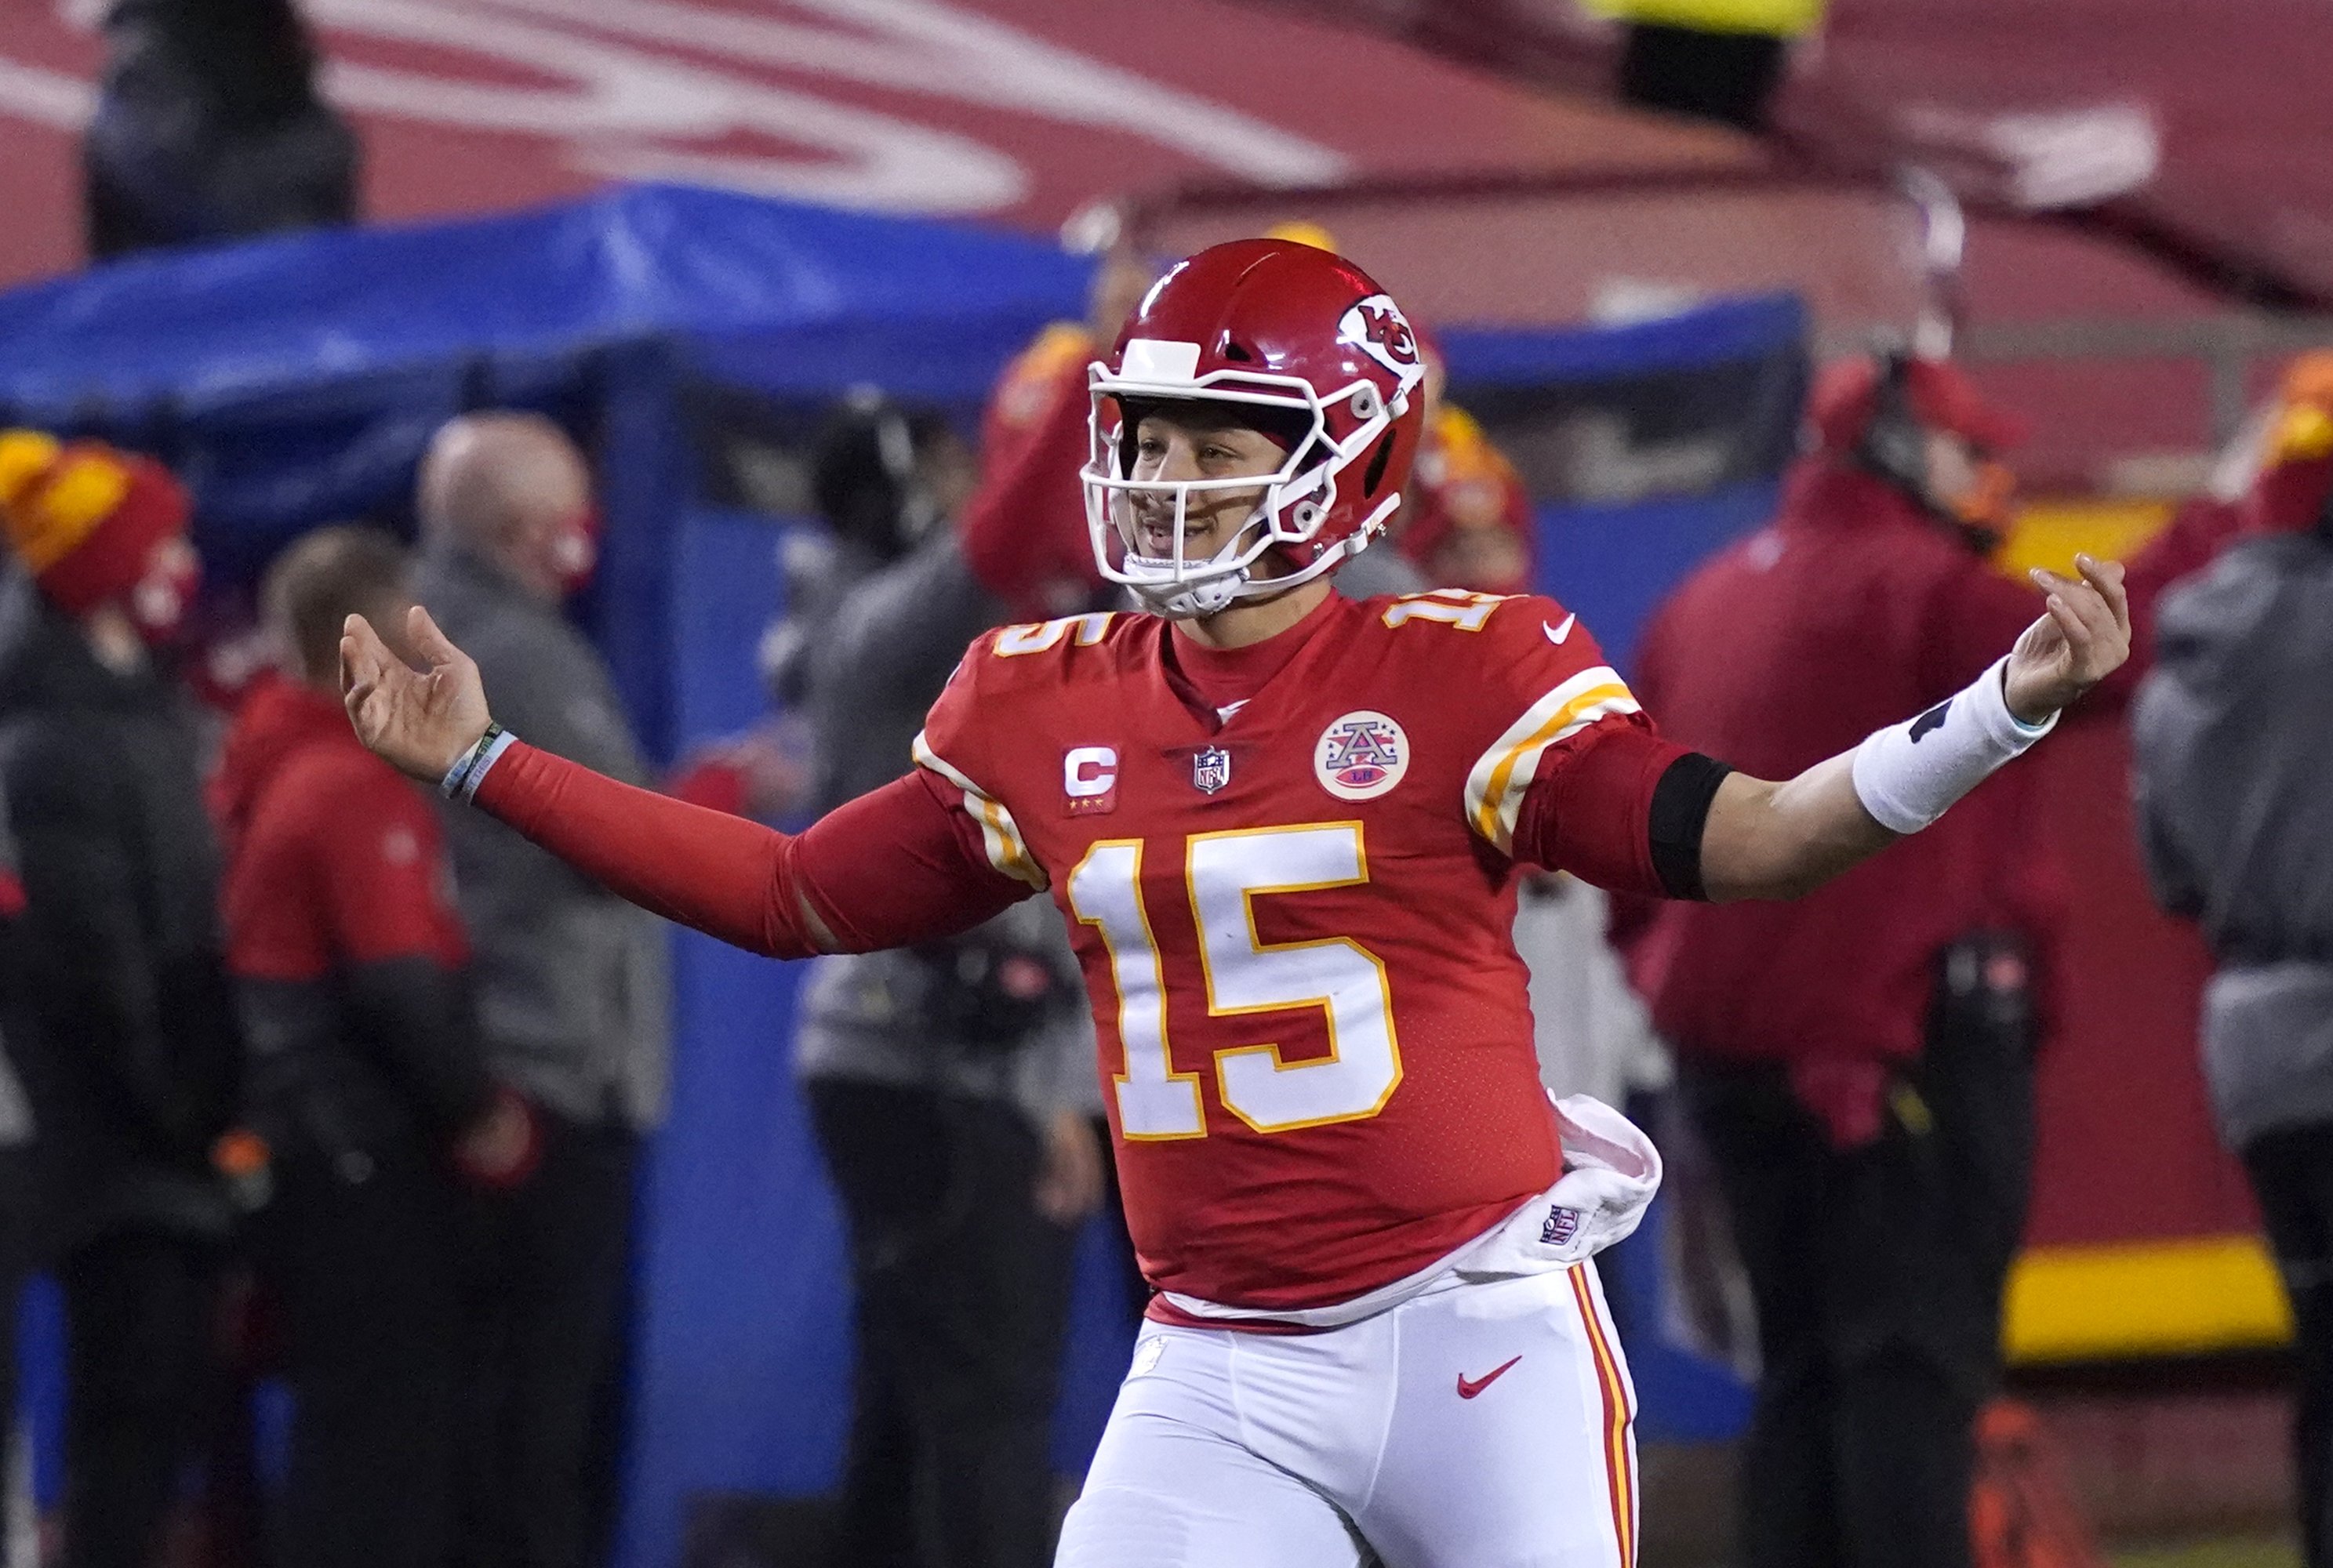 NFL Draft Trades: ESPN analyst says Chiefs overpaid Patriots for